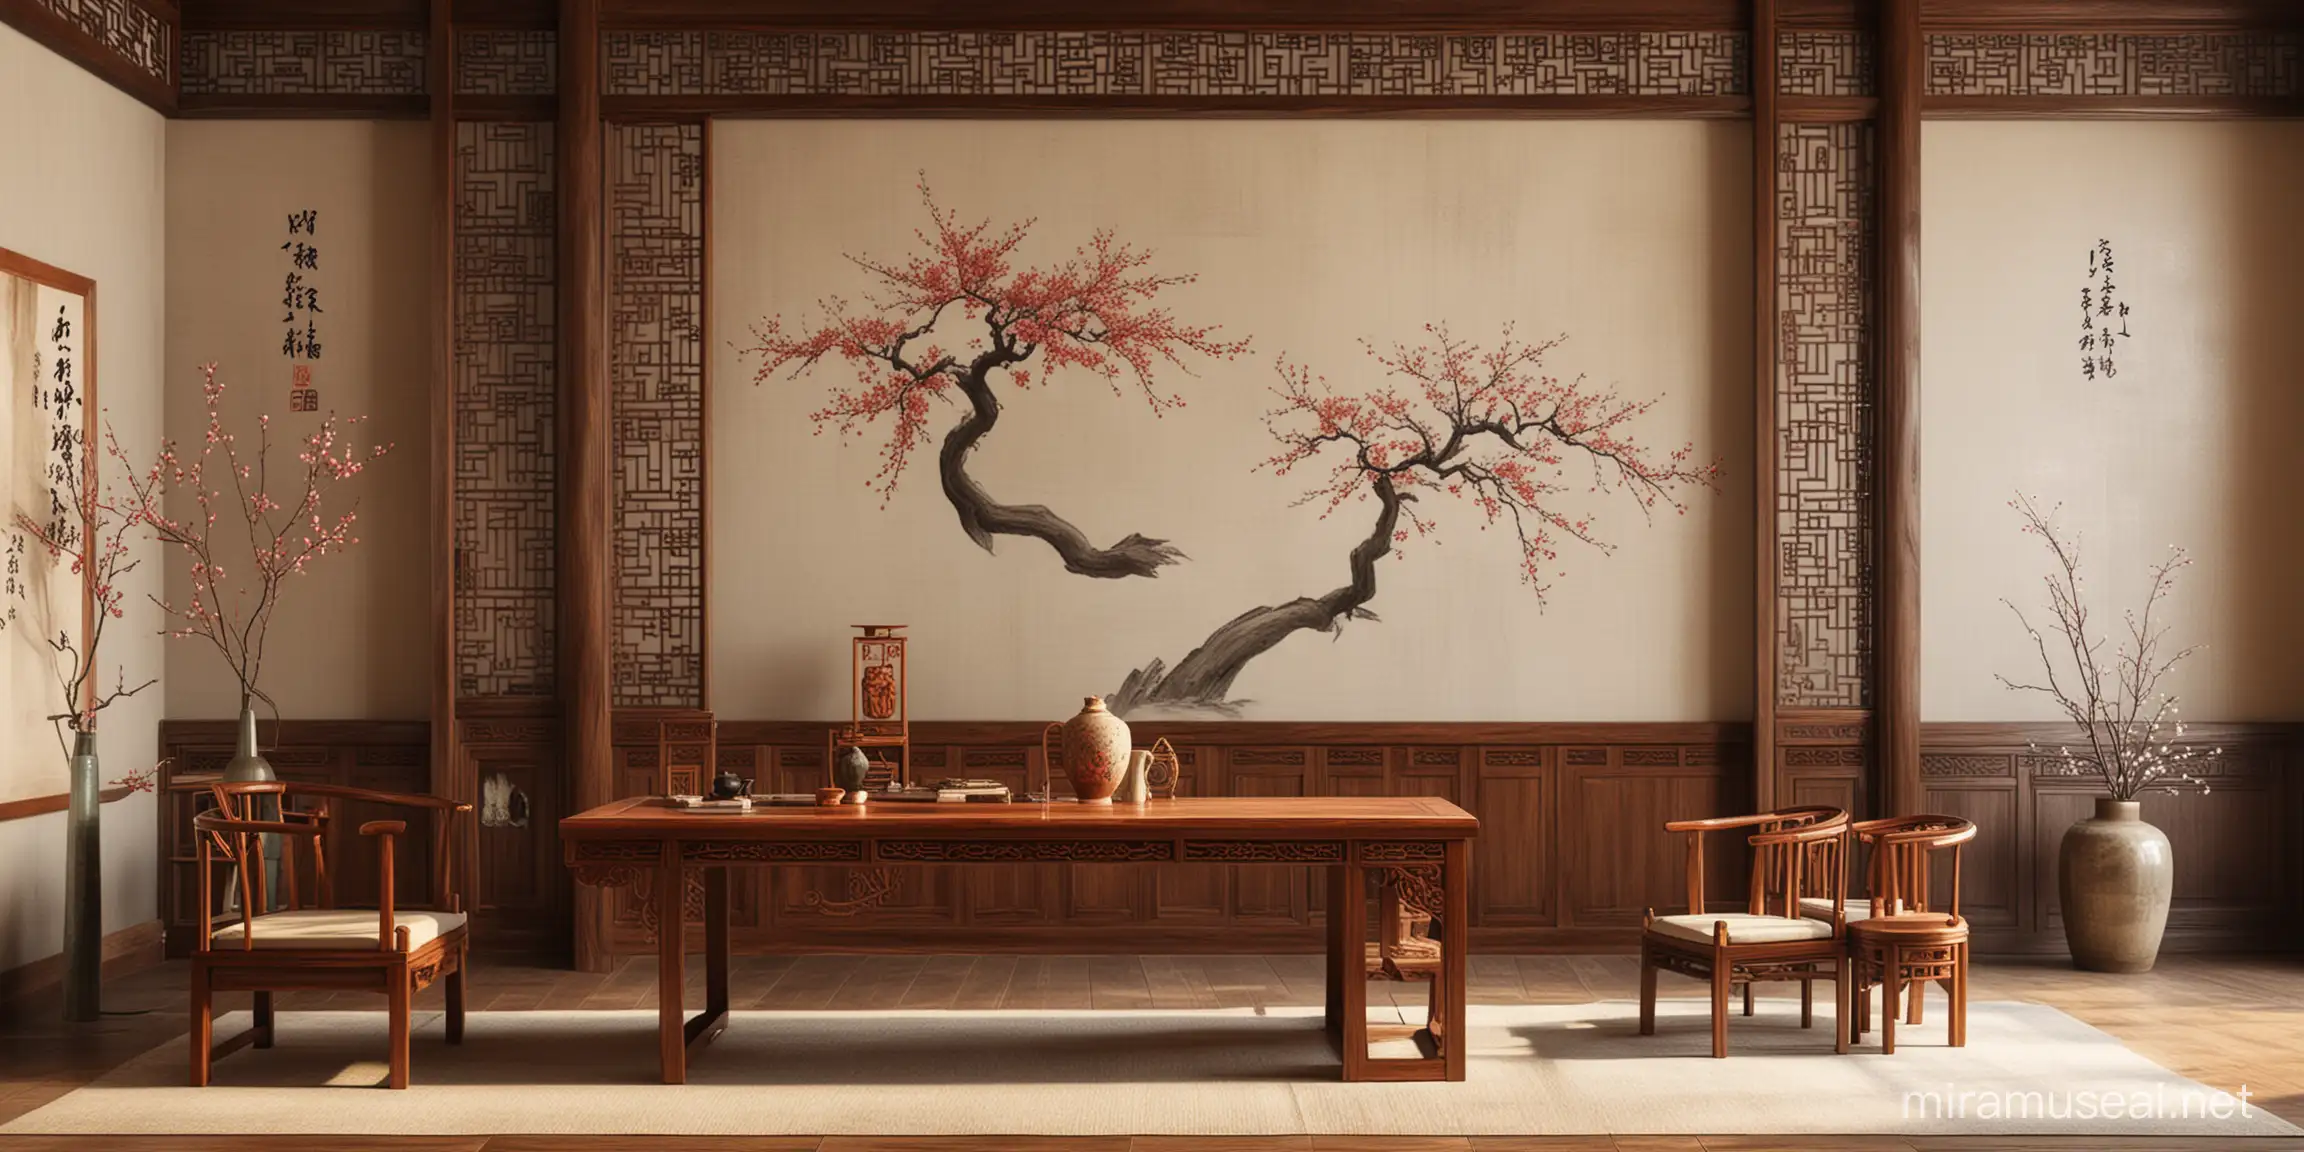 Ancient Chinese backdrop, a vividly colored wooden table，Ancient Interior design,study room，wall decorations feature a traditional ancient Chinese style.